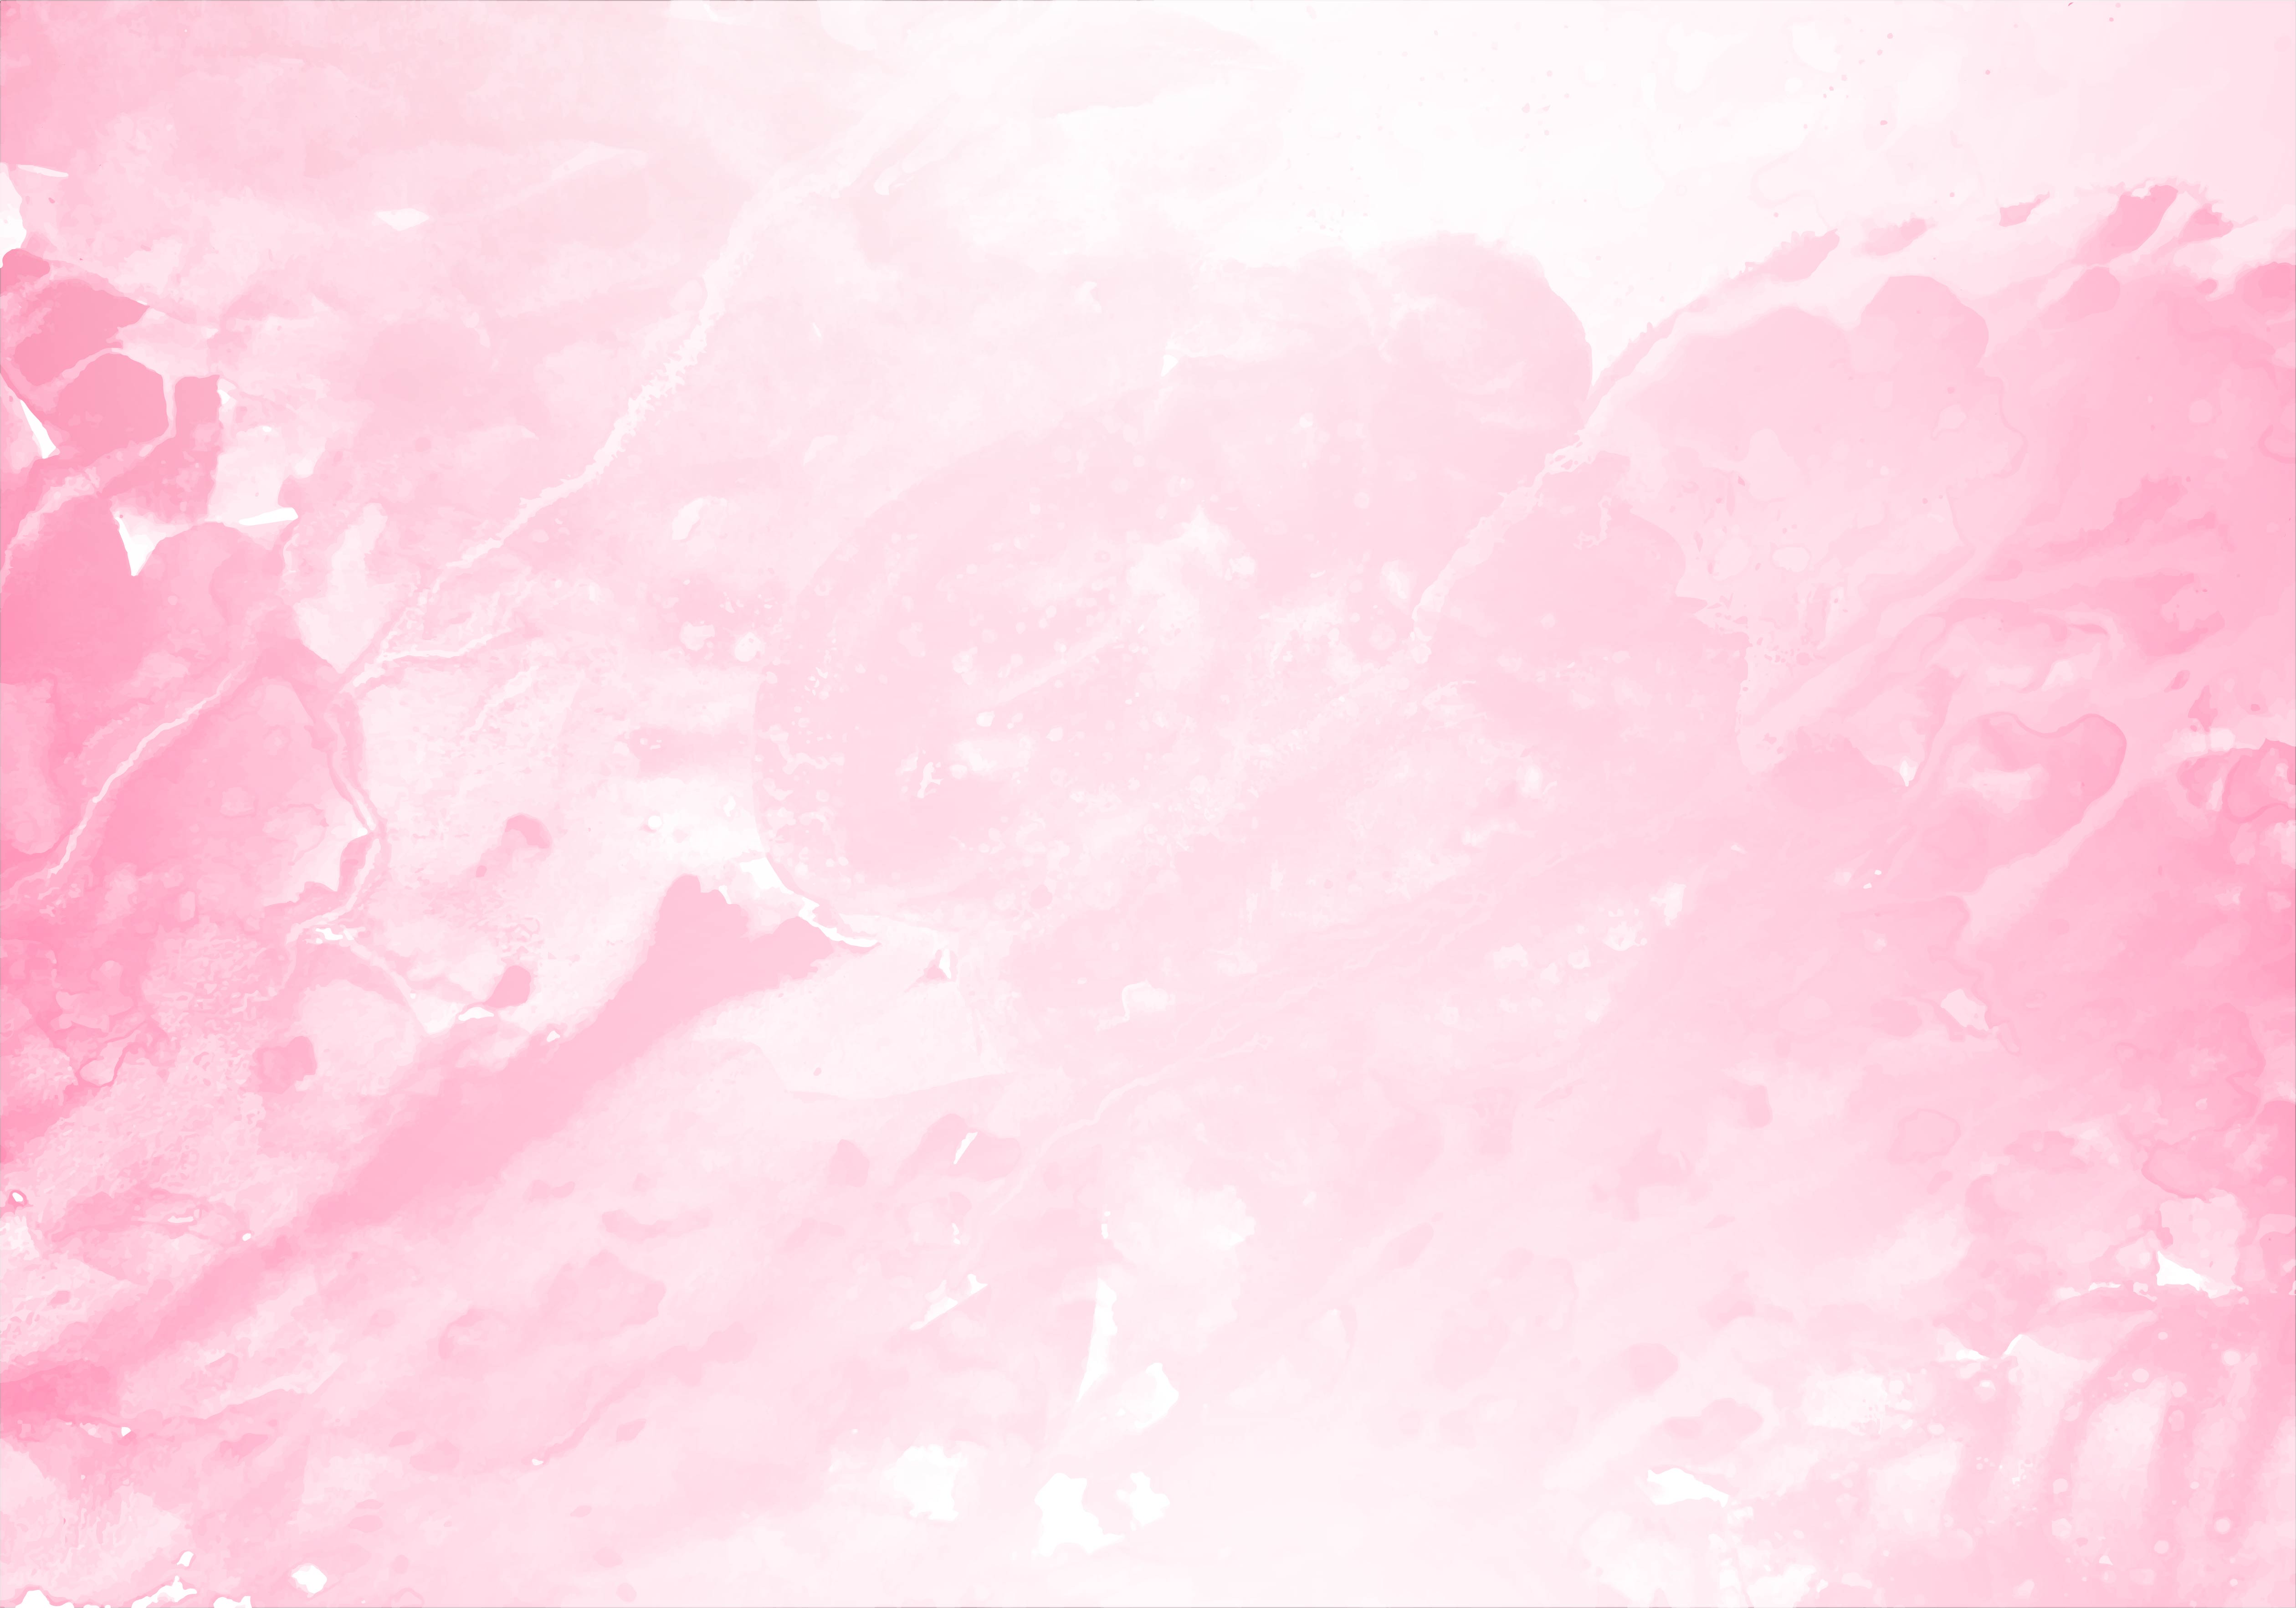 Abstract light pink splash watercolor texture 1311128 - Download Free